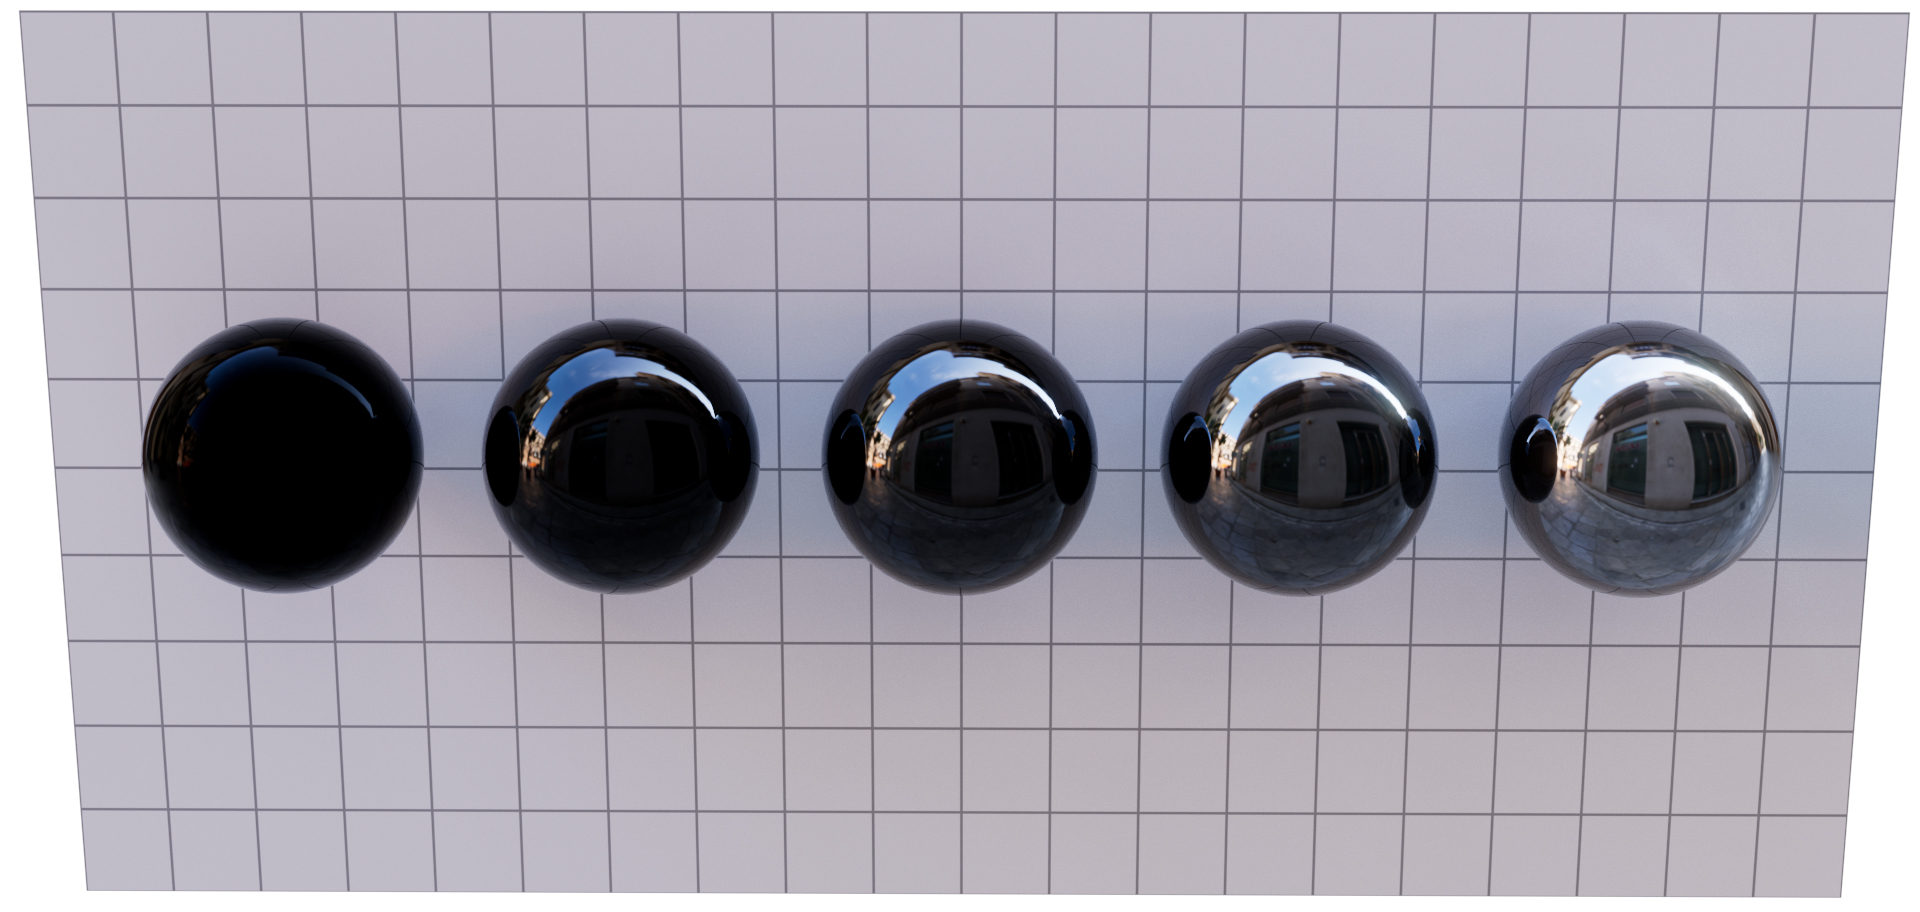 Reflectance, dielectric specular reflection